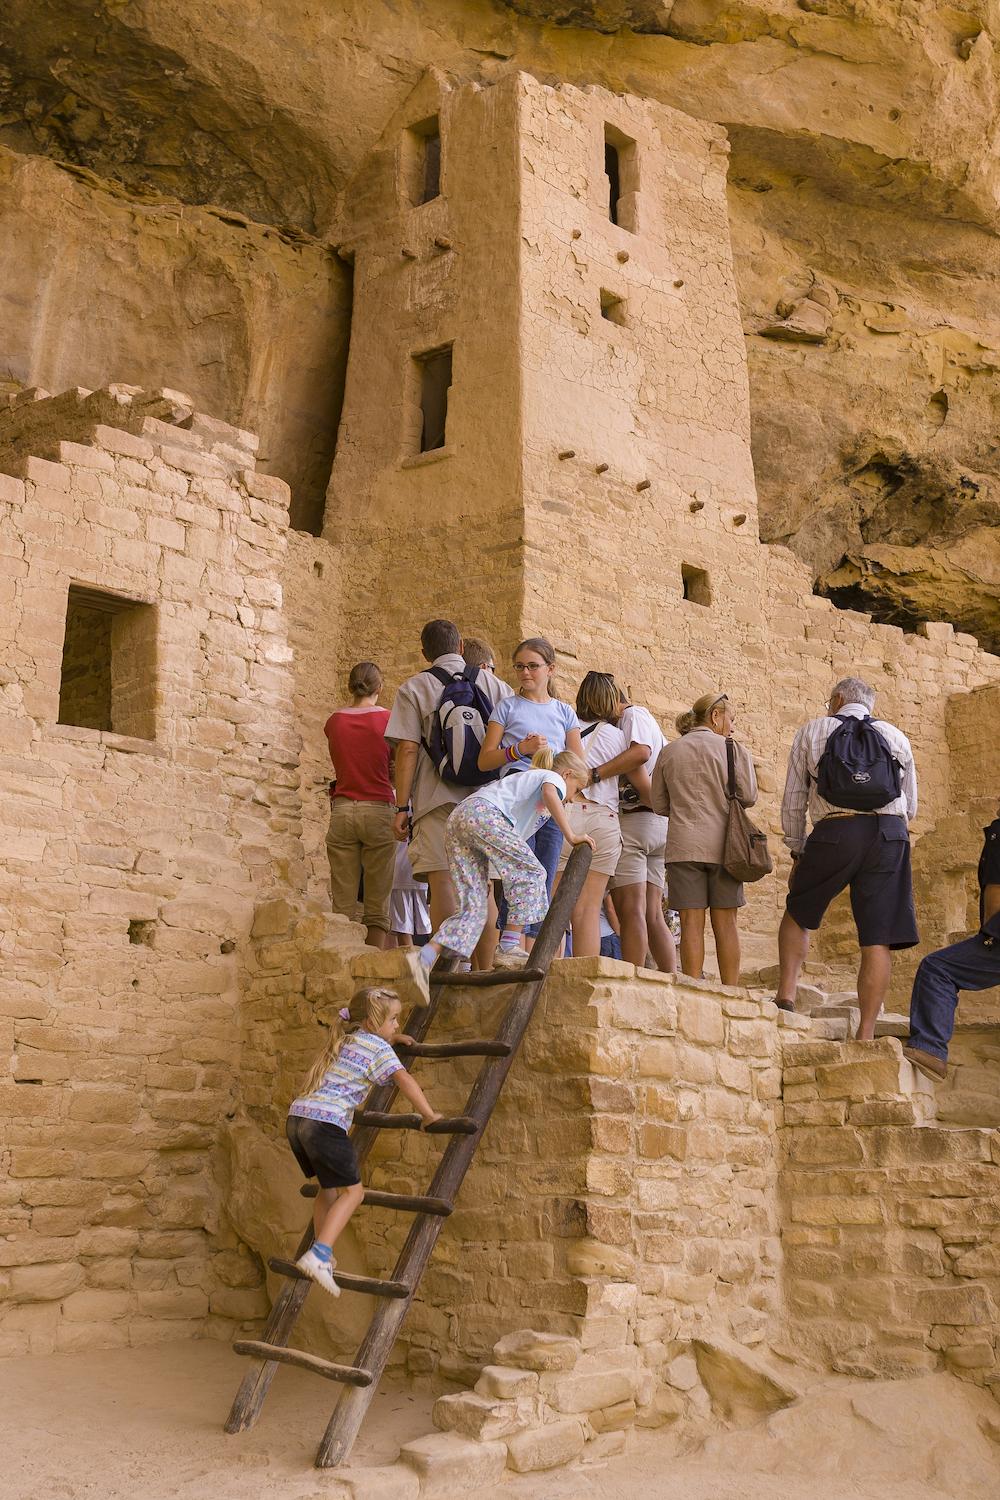 Modern visitors explore the remains of Cliff Palace. (Rob Crandall/Shutterstock)